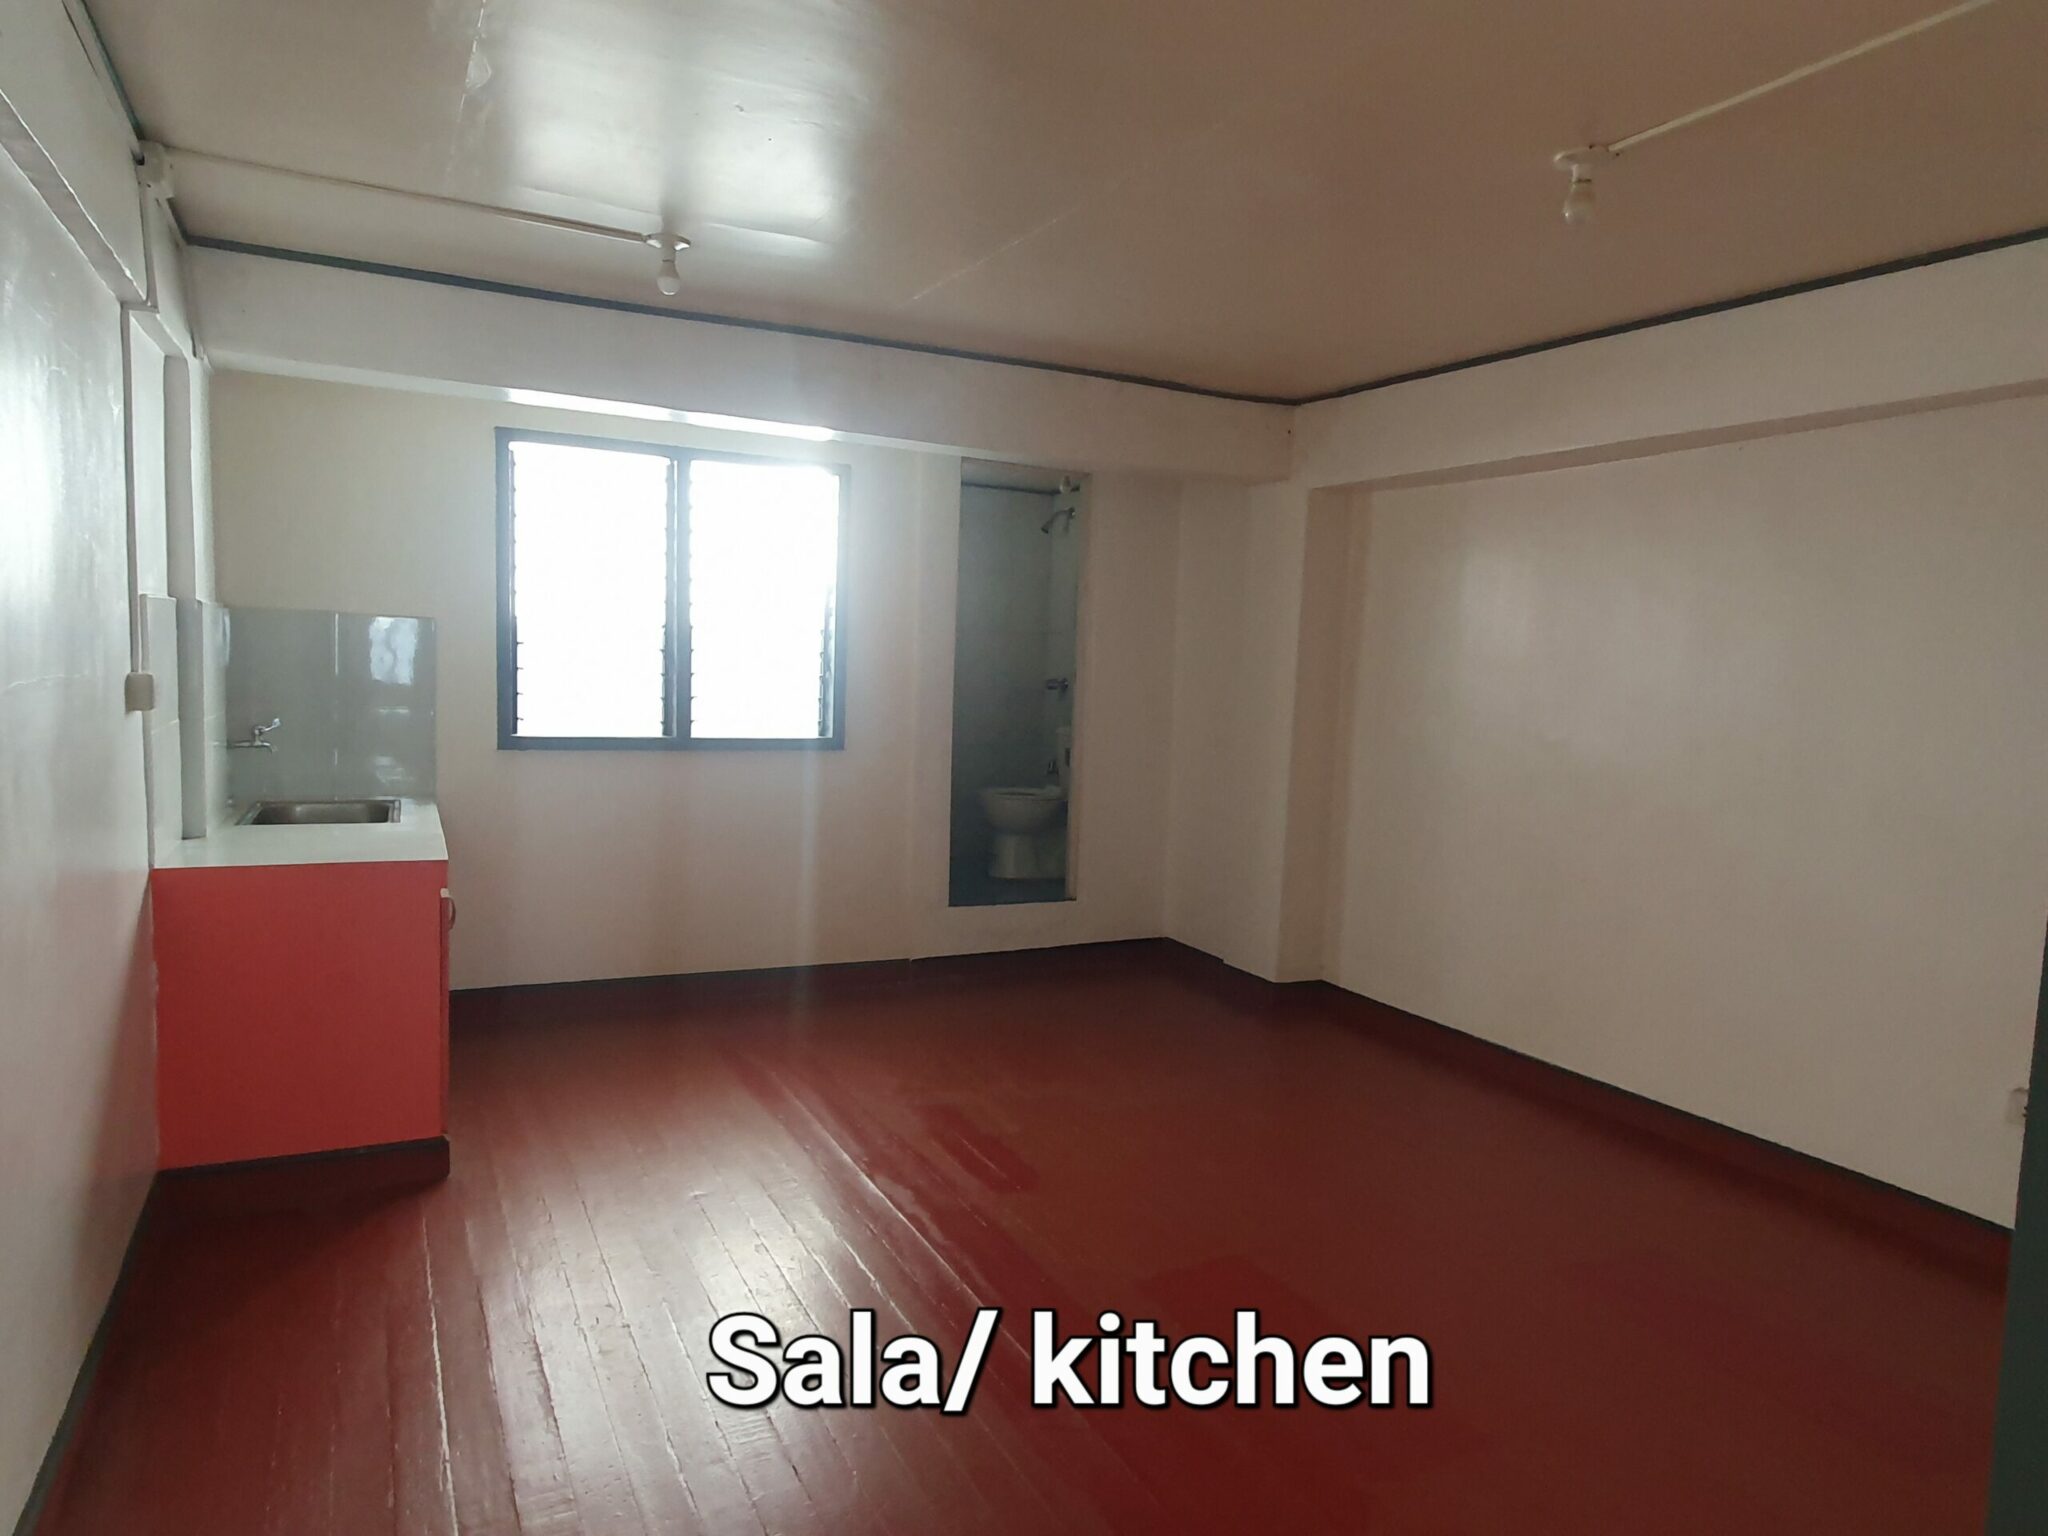 2BR Apartment for rent [no parking]